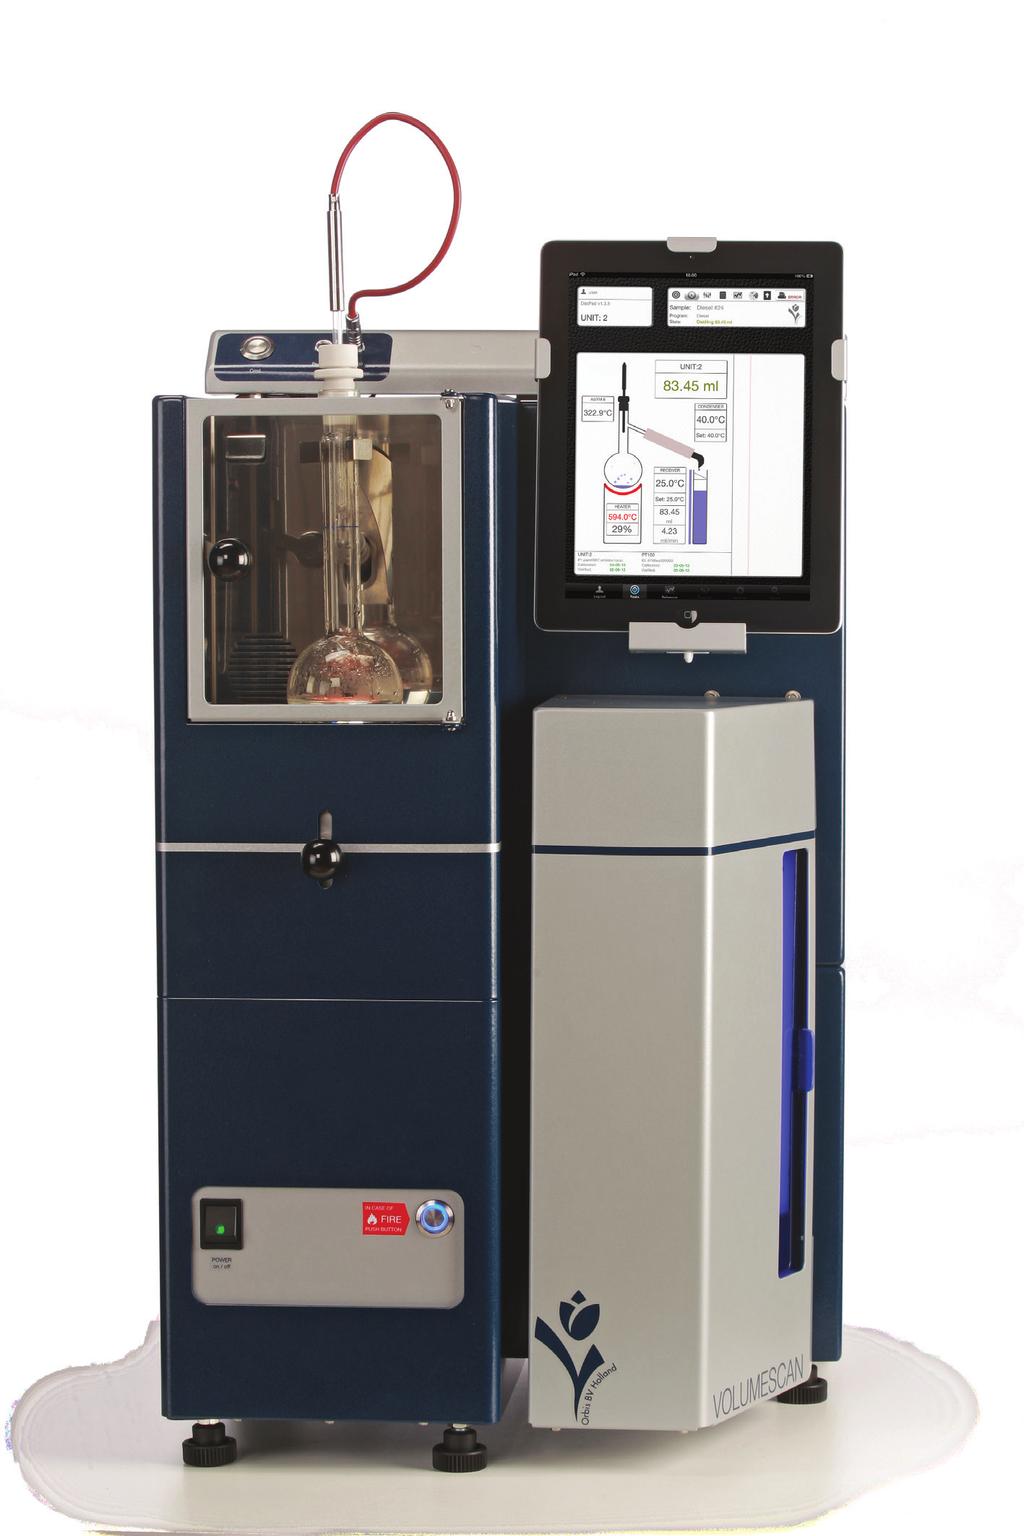 PAMv2 benefits Extremely precise, reliable and comparable test results High end, solid state hardware: Fast, easy & fully automatic operation, yet offers in-depth customization settings for